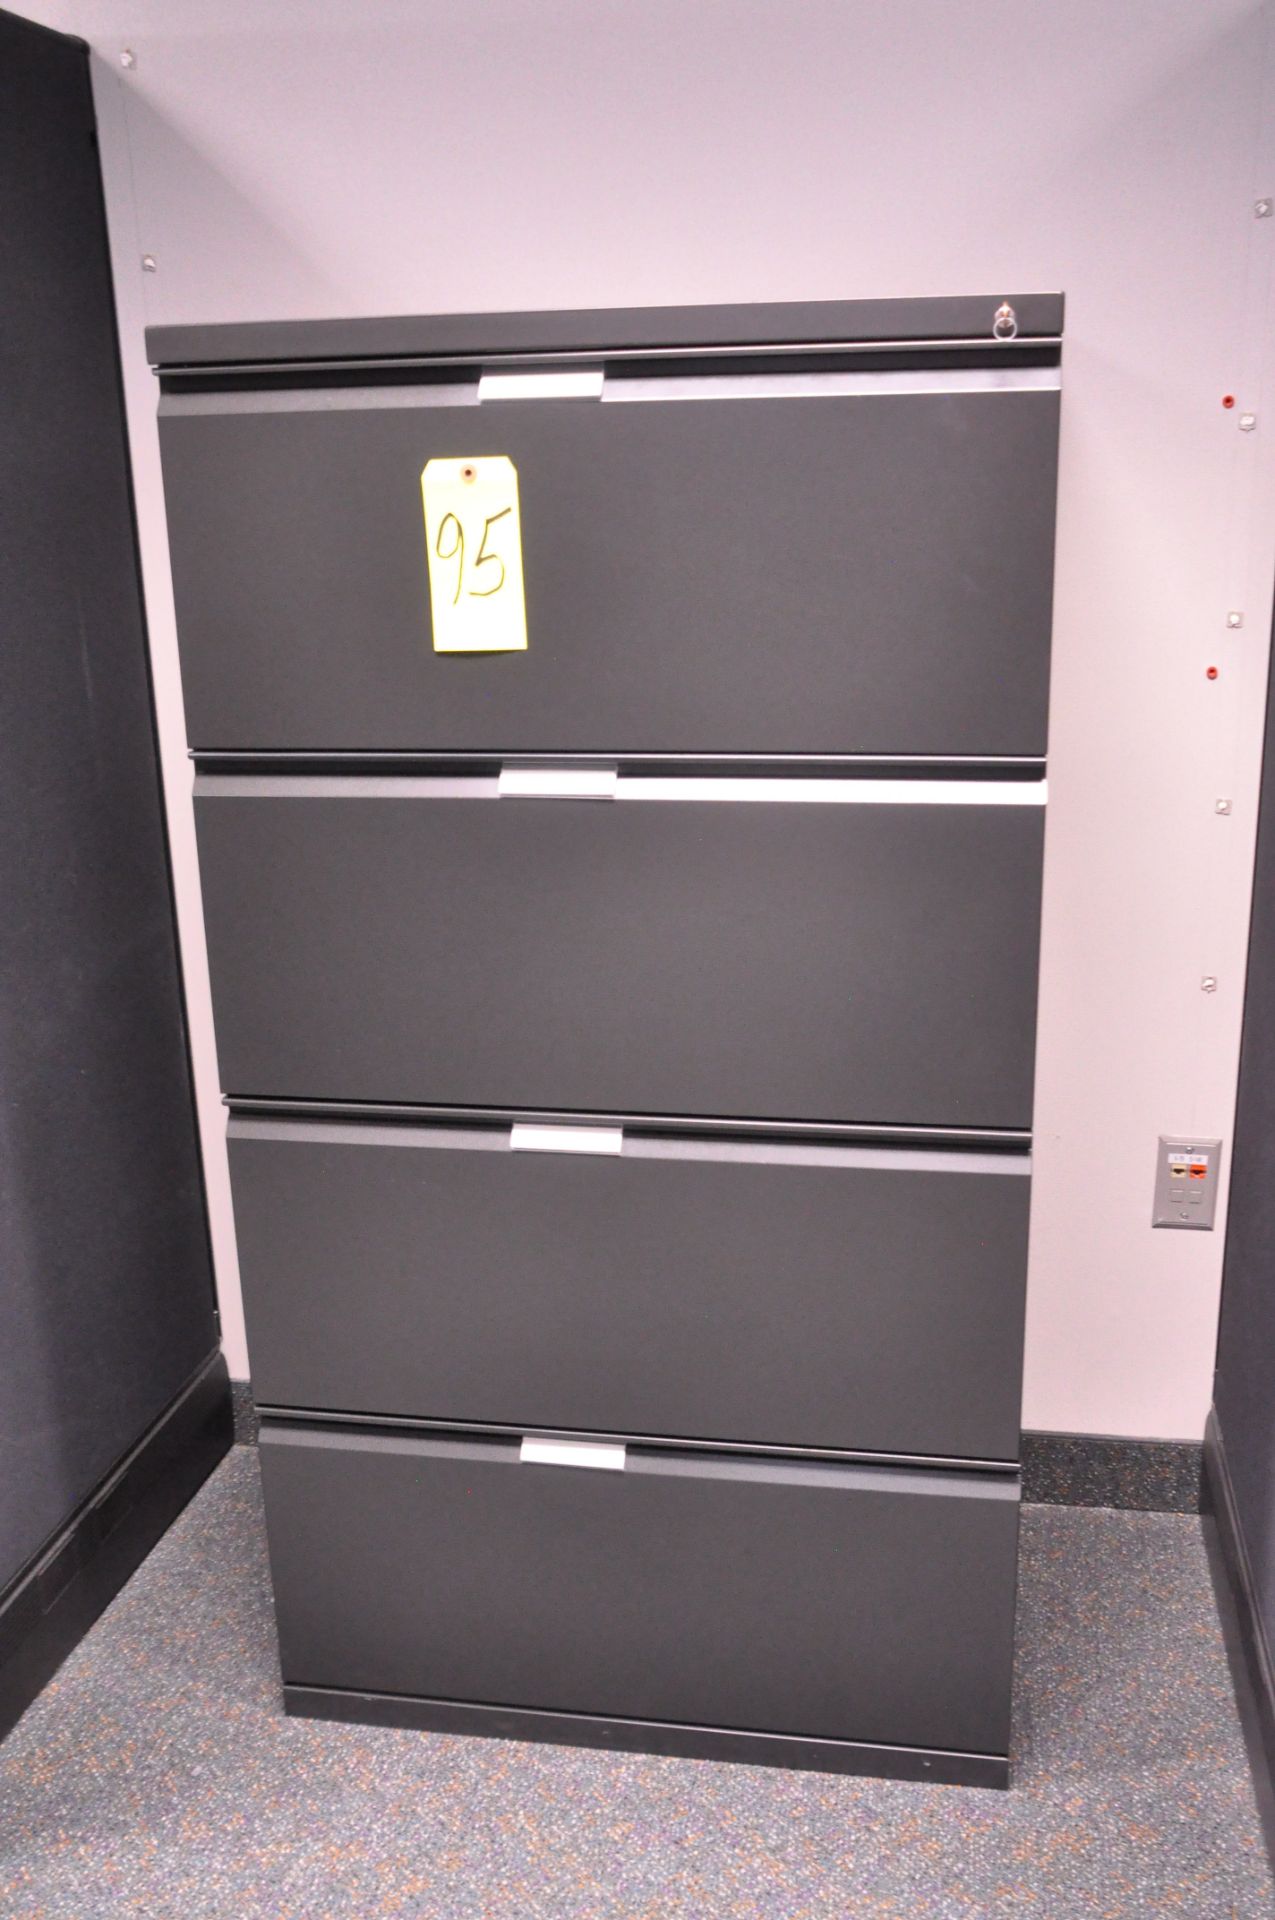 Lot-(1) Herman Miller 4-Station Cubicle Partition Work System with Standing Cabinets, and Partition - Image 12 of 12